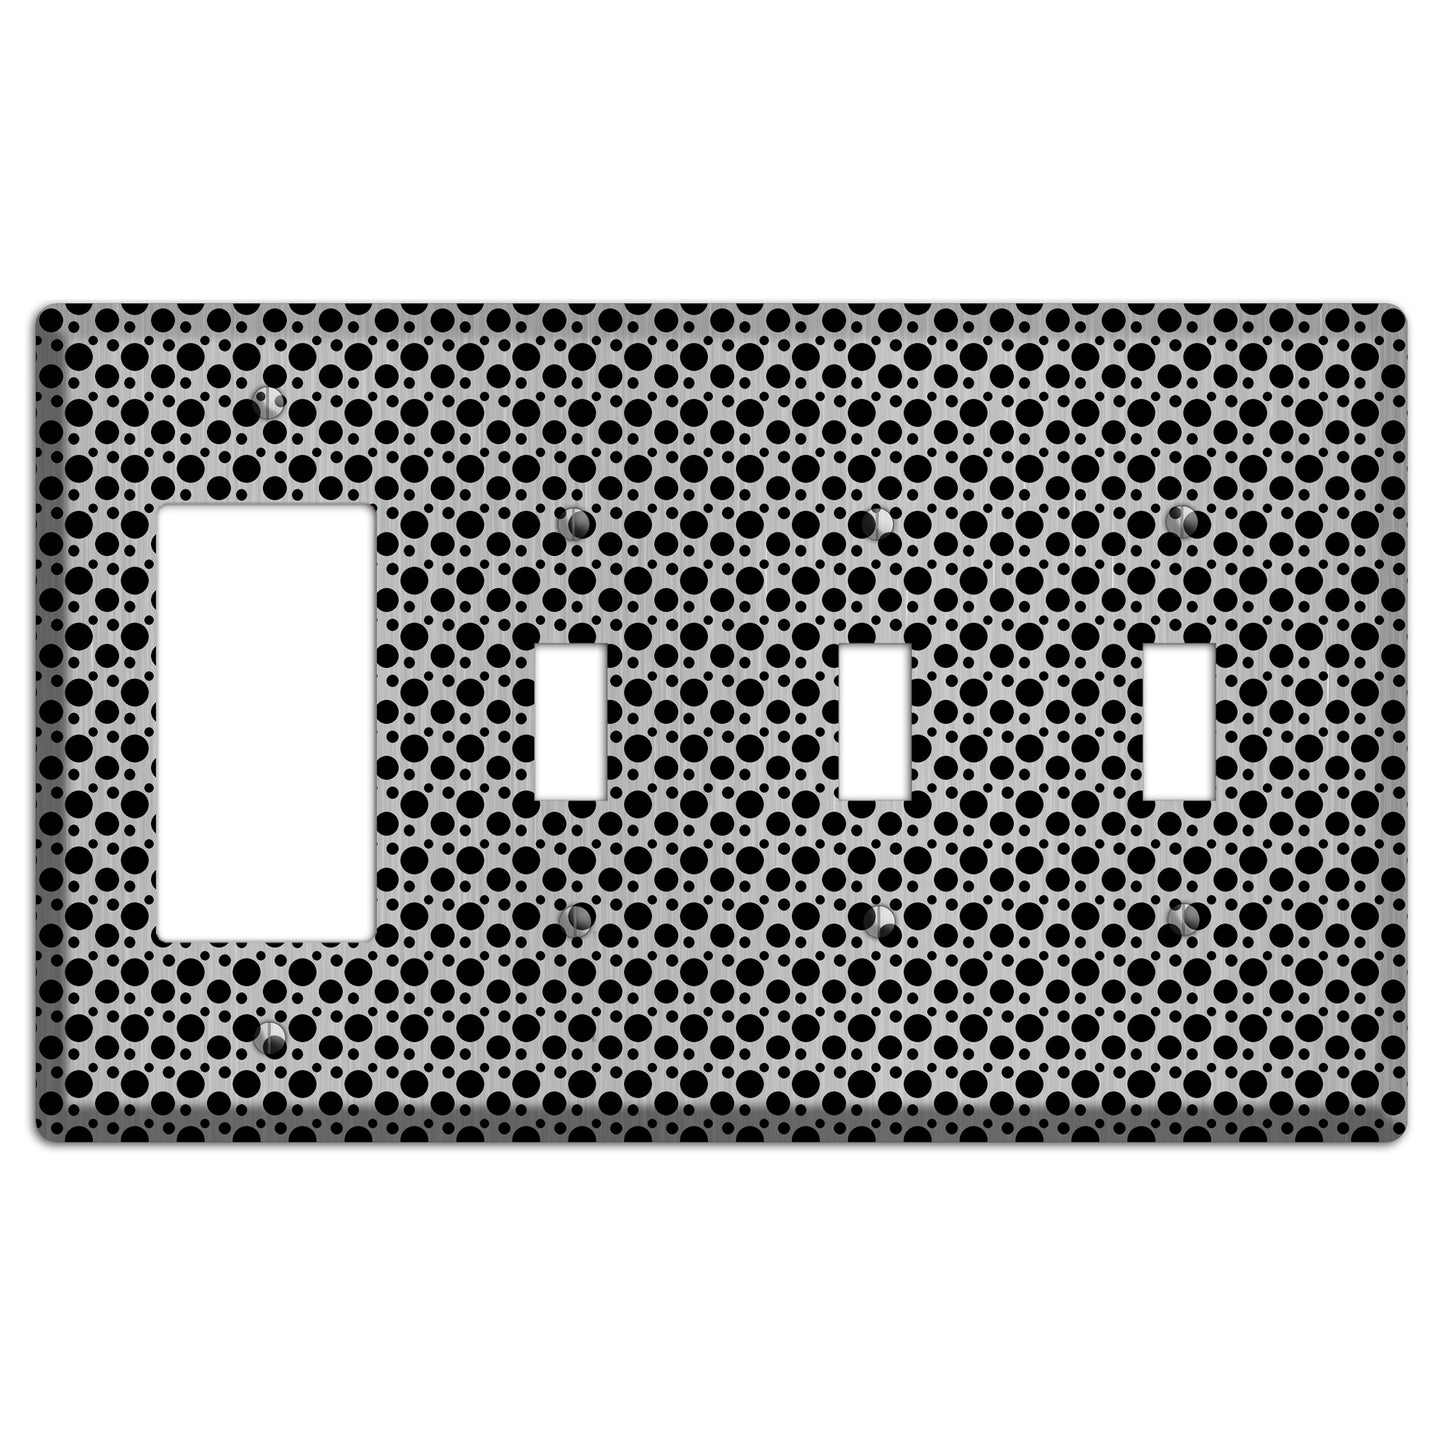 Small and Tiny Polka Dots Stainless Rocker / 3 Toggle Wallplate